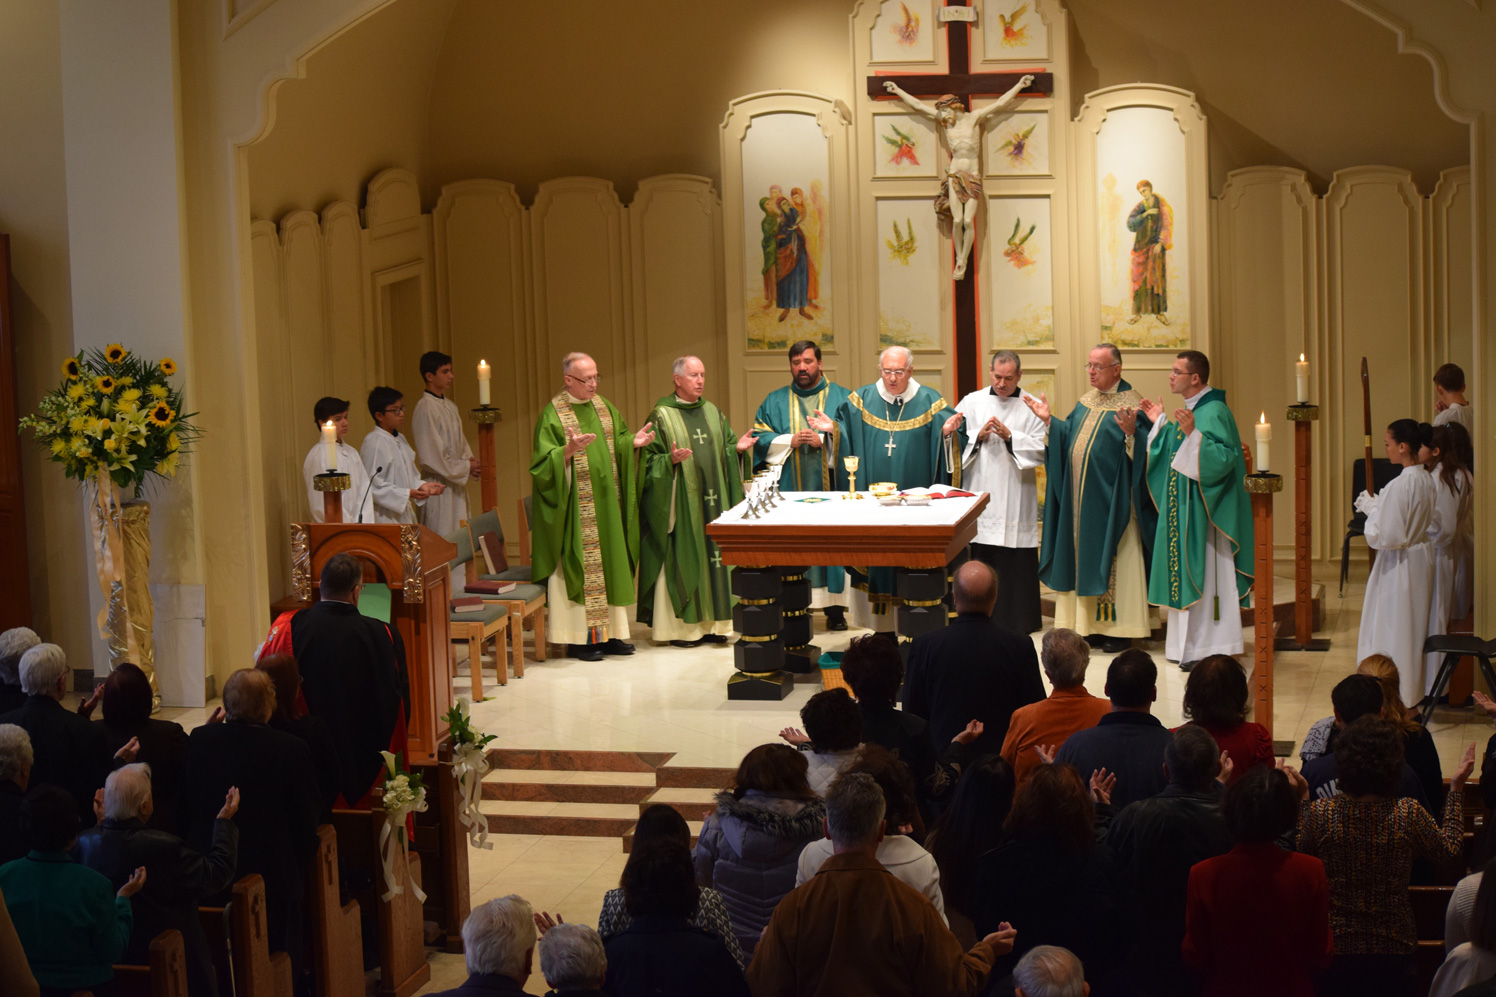 Bishop Nicholas DiMarzio was the main celebrant at a centennial Mass, celebrating 100 years of St. Anastasia parish in Douglaston. The parish, which started with 100 parishioners in 1915, now has nearly 2,000 registered families. 